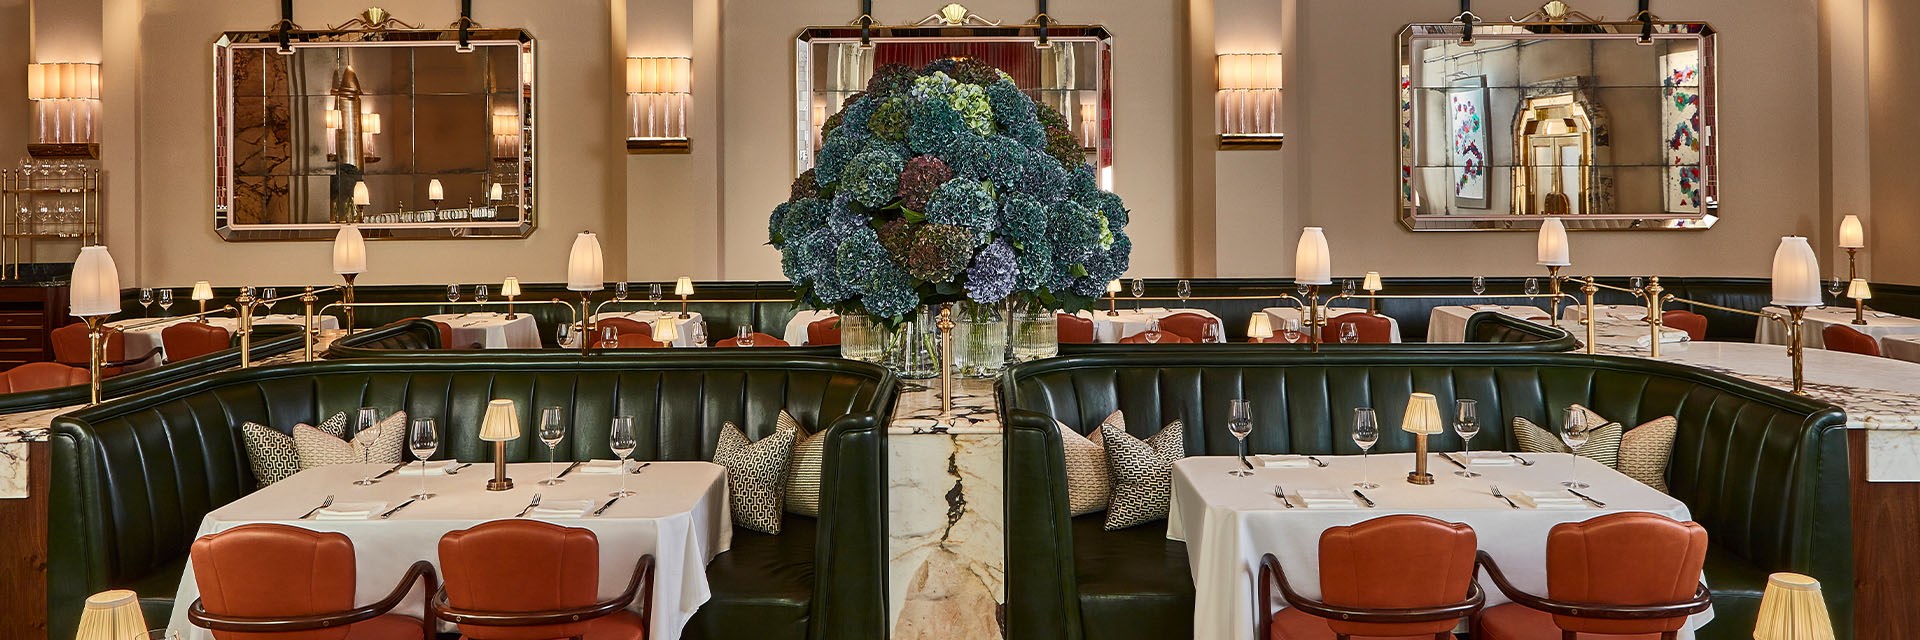 Claridge's restaurant with green banquets, set tables and a big vase of blue hydrangeas in the centre